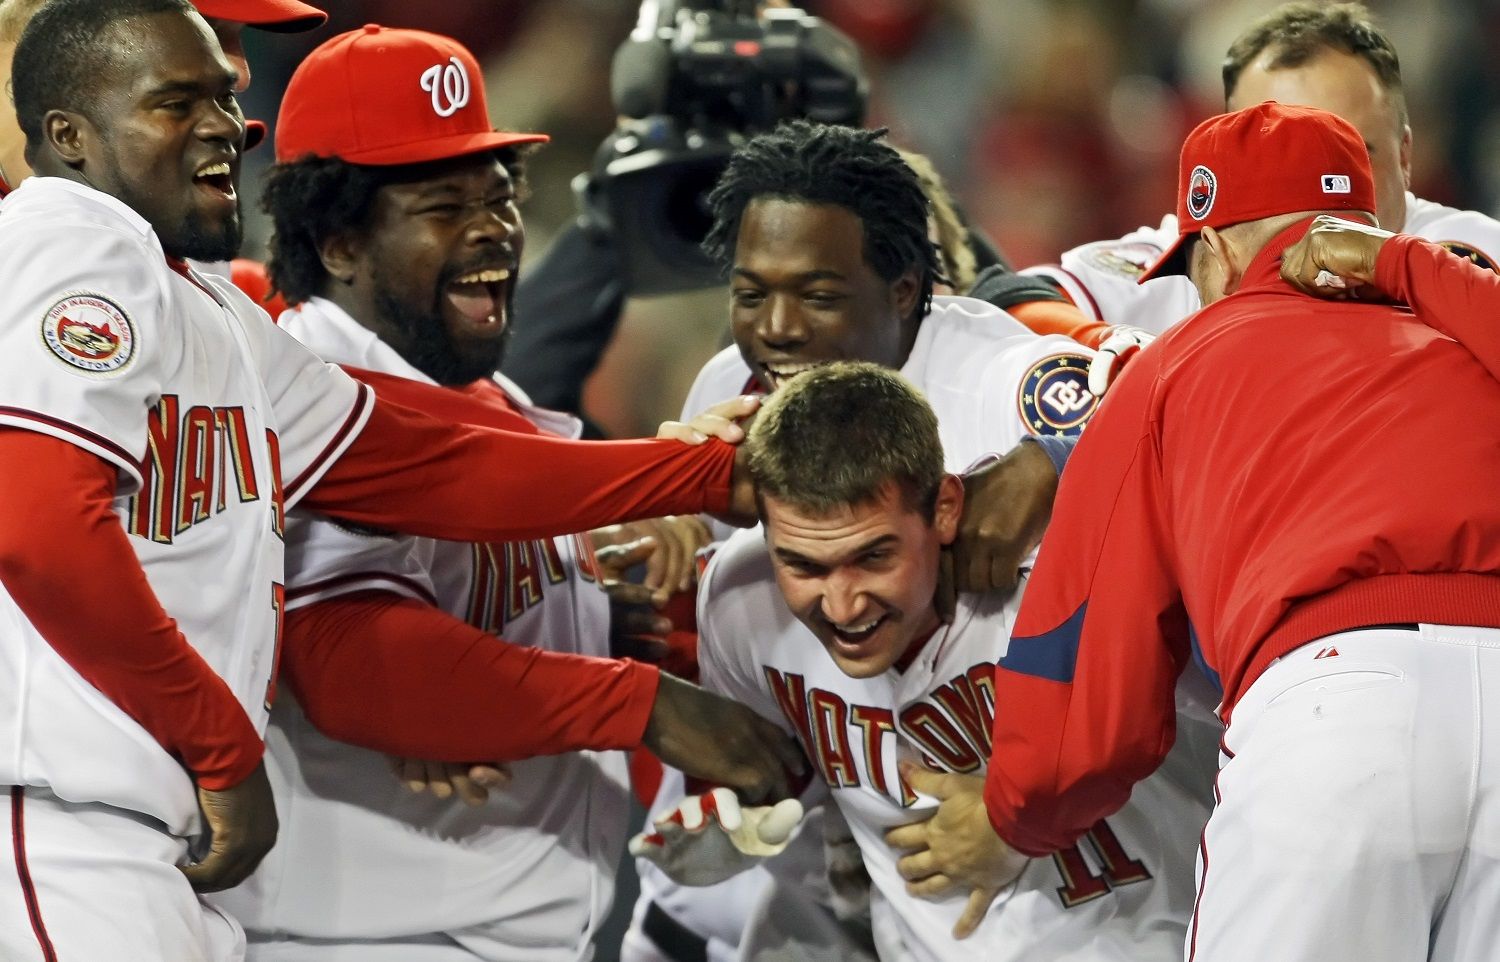 WASHINGTON - MARCH 30:  Ryan Zimmerman #11 of the Washington Nationals gets congratulated by teammates after hitting the game winning home-run in the bottom of the 9th inning during the game against the Atlanta Braves on opening day March 30, 2008 at Nationals Park in Washington, DC. The Nationals won 3-2.  (Photo by Drew Hallowell/Getty Images)